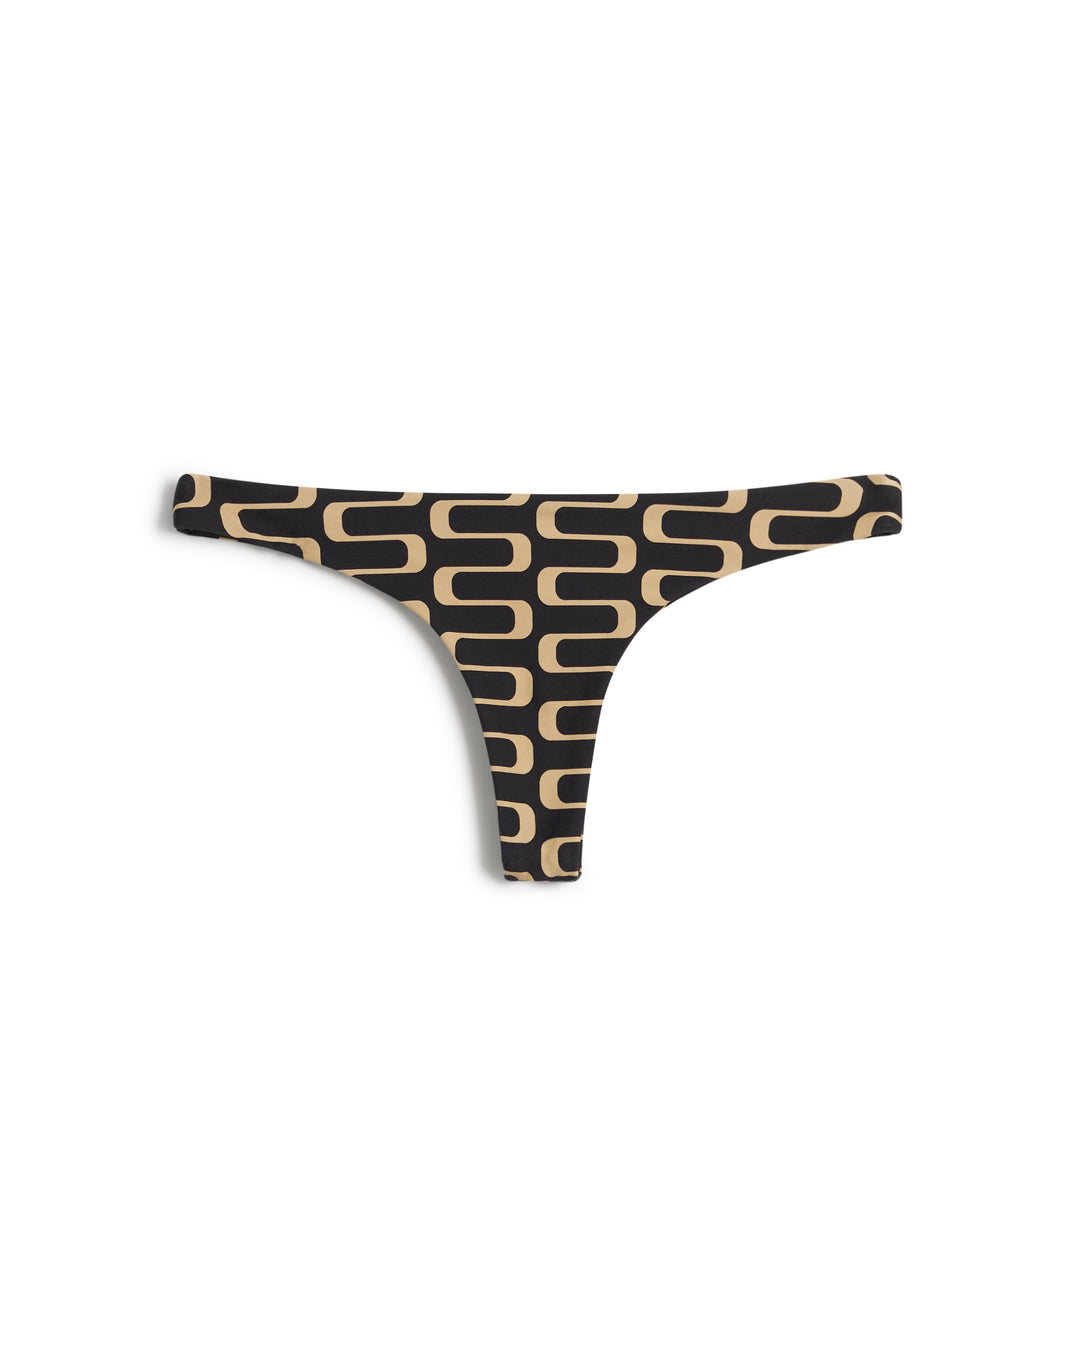 A black and beige patterned thong-style underwear with a mid-rise cut and cheeky coverage against a white background, The Gomera Bottom - Albatross from Dandy Del Mar.